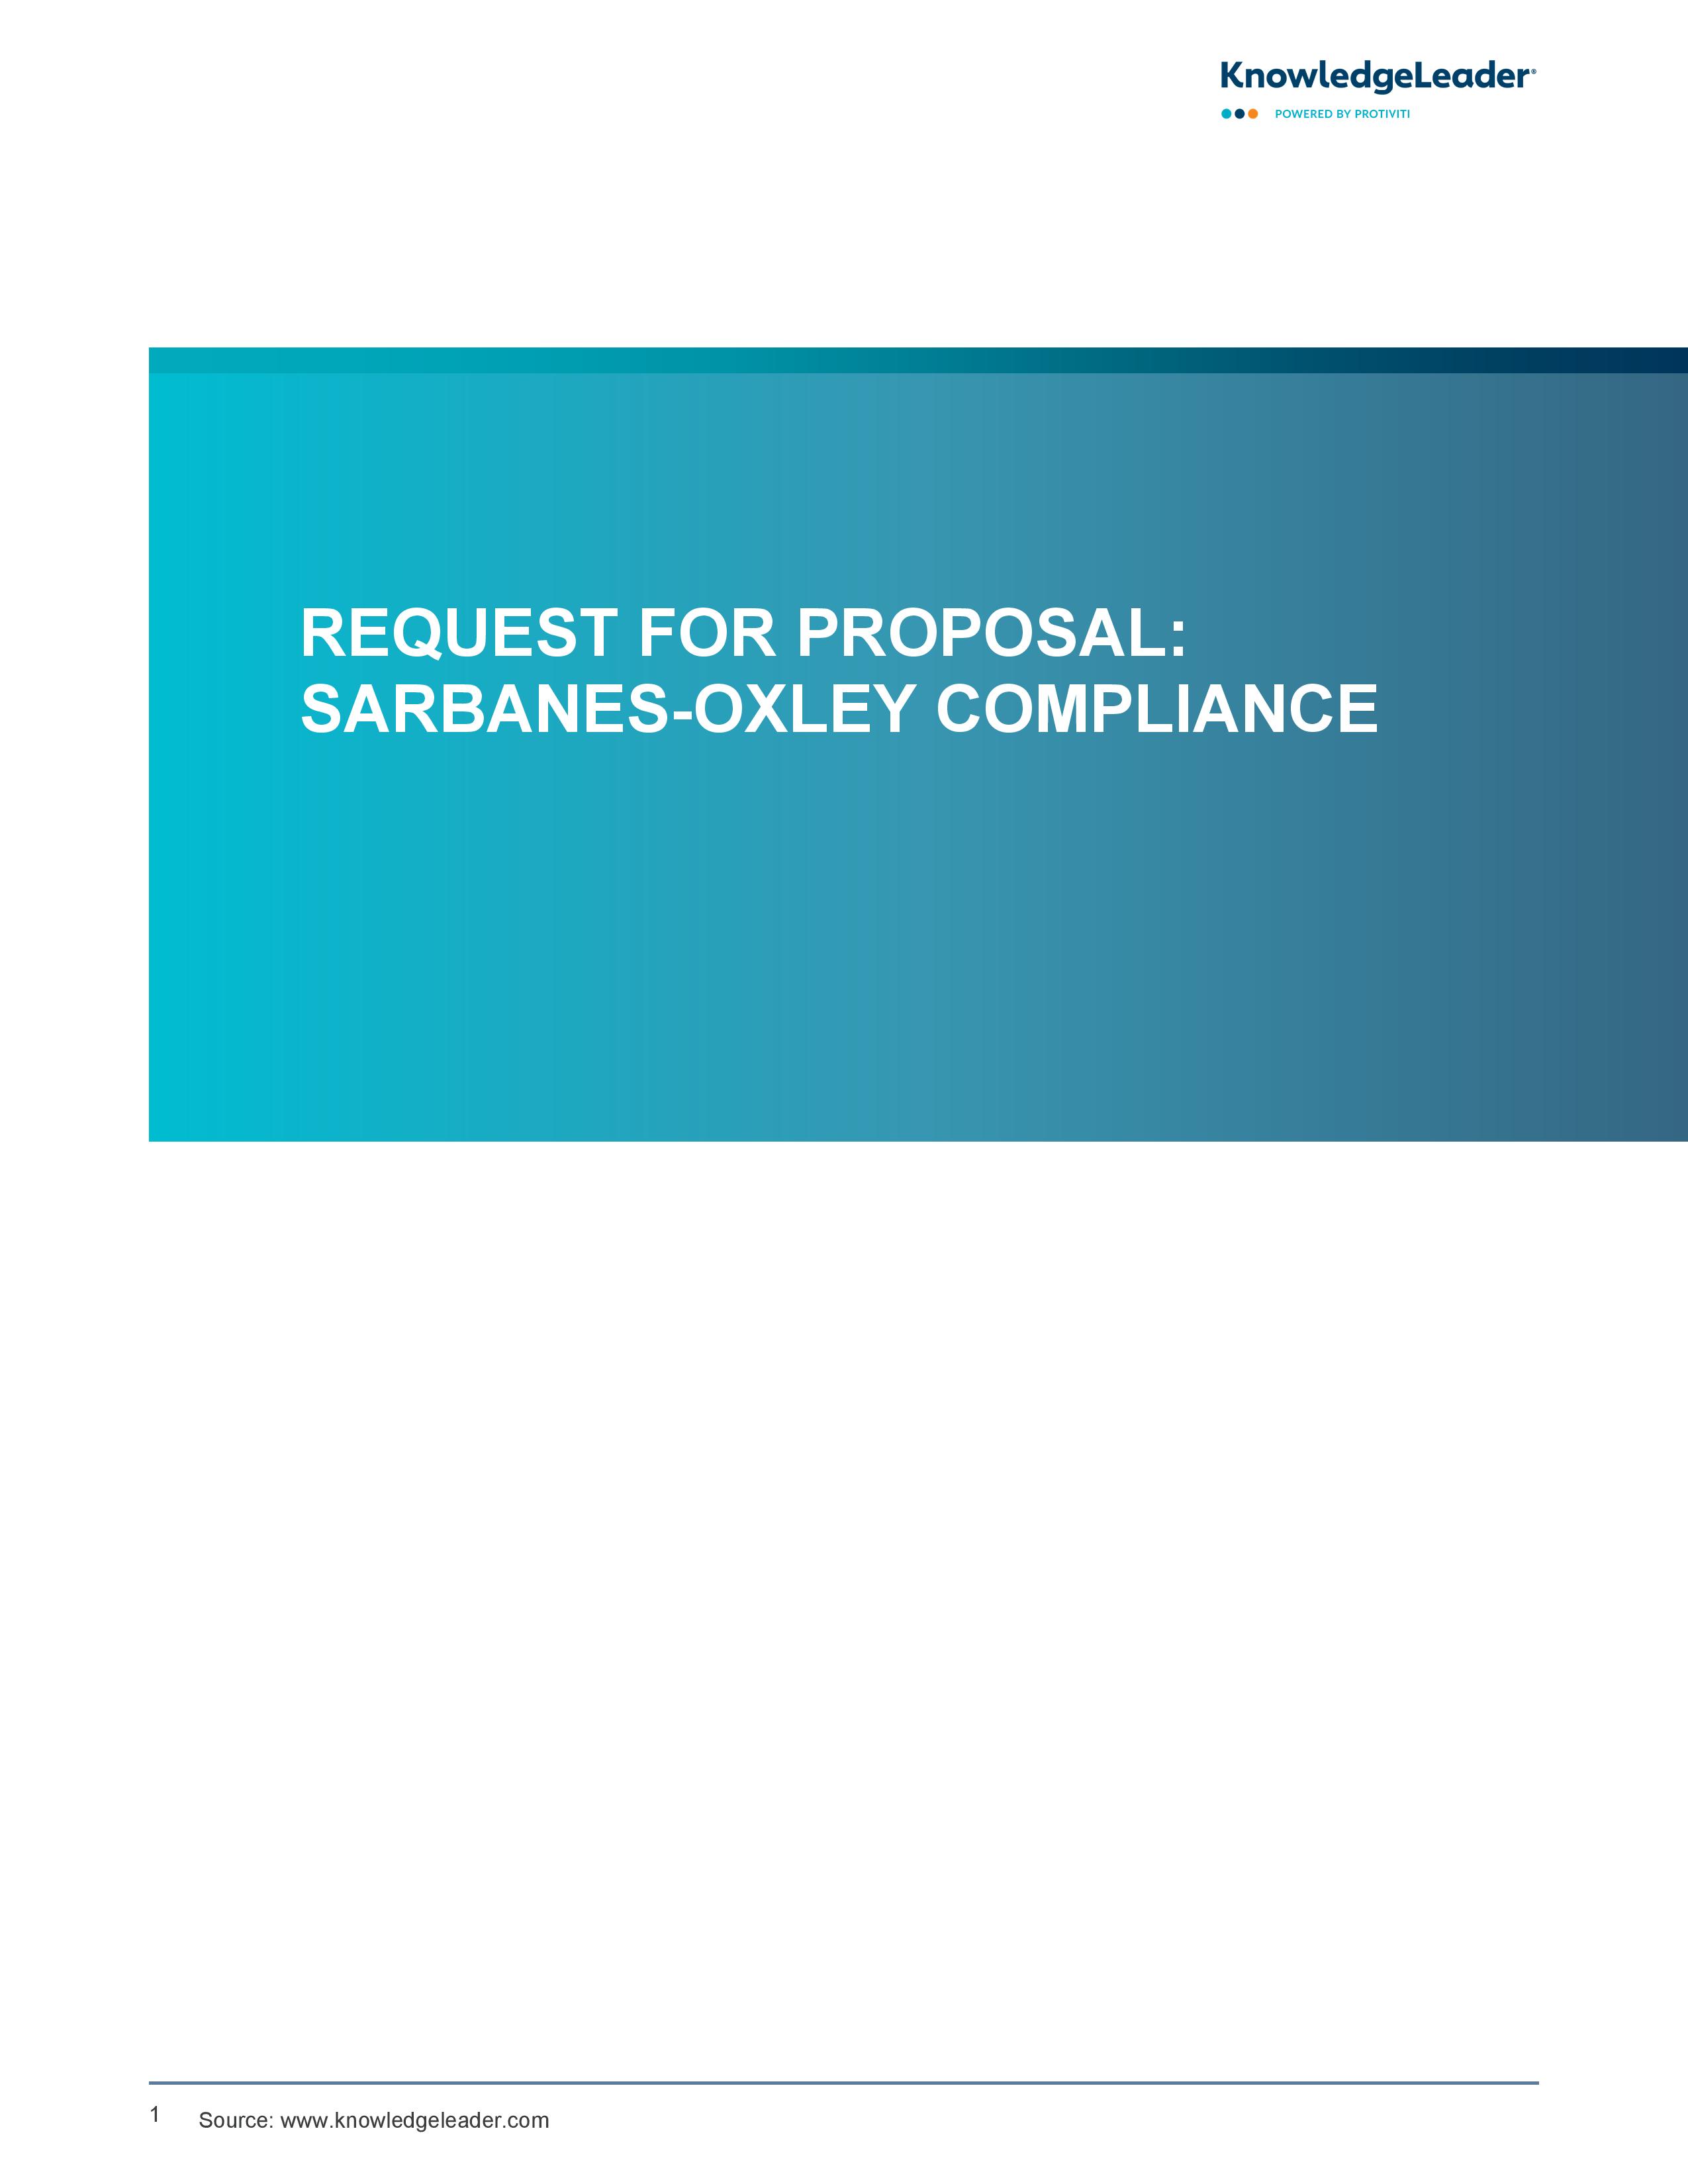 screenshot of the first page of Request for Proposal Sarbanes-Oxley Compliance